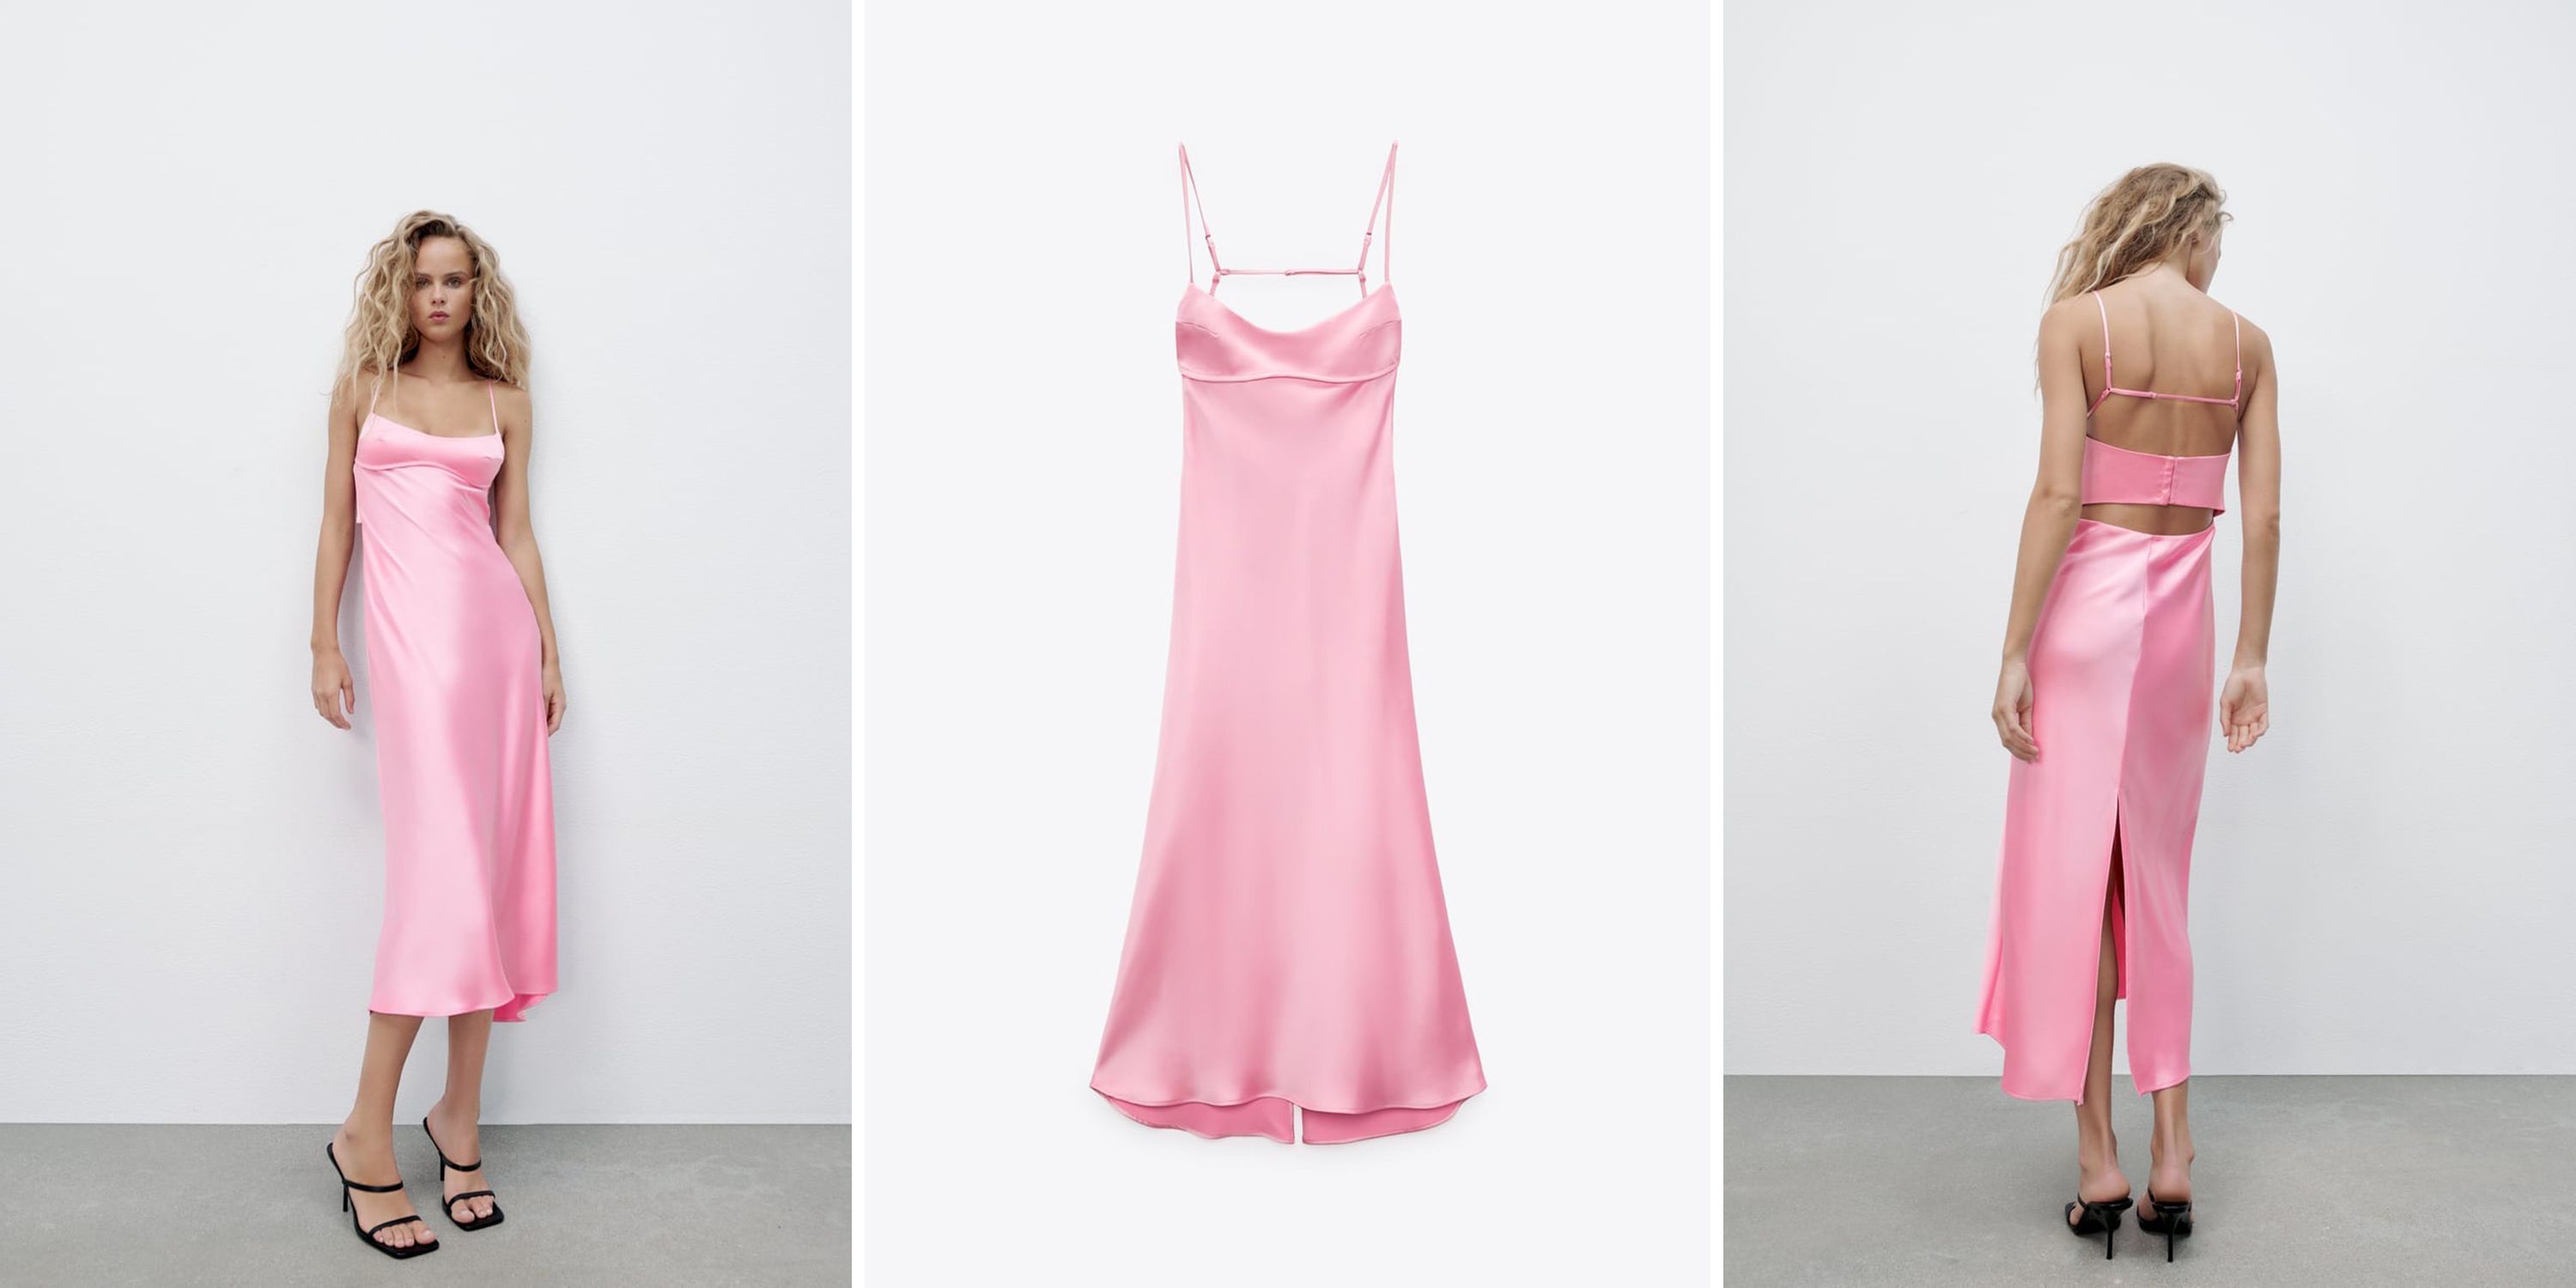 TikTok Is Infatuated With This $60 Slip Dress